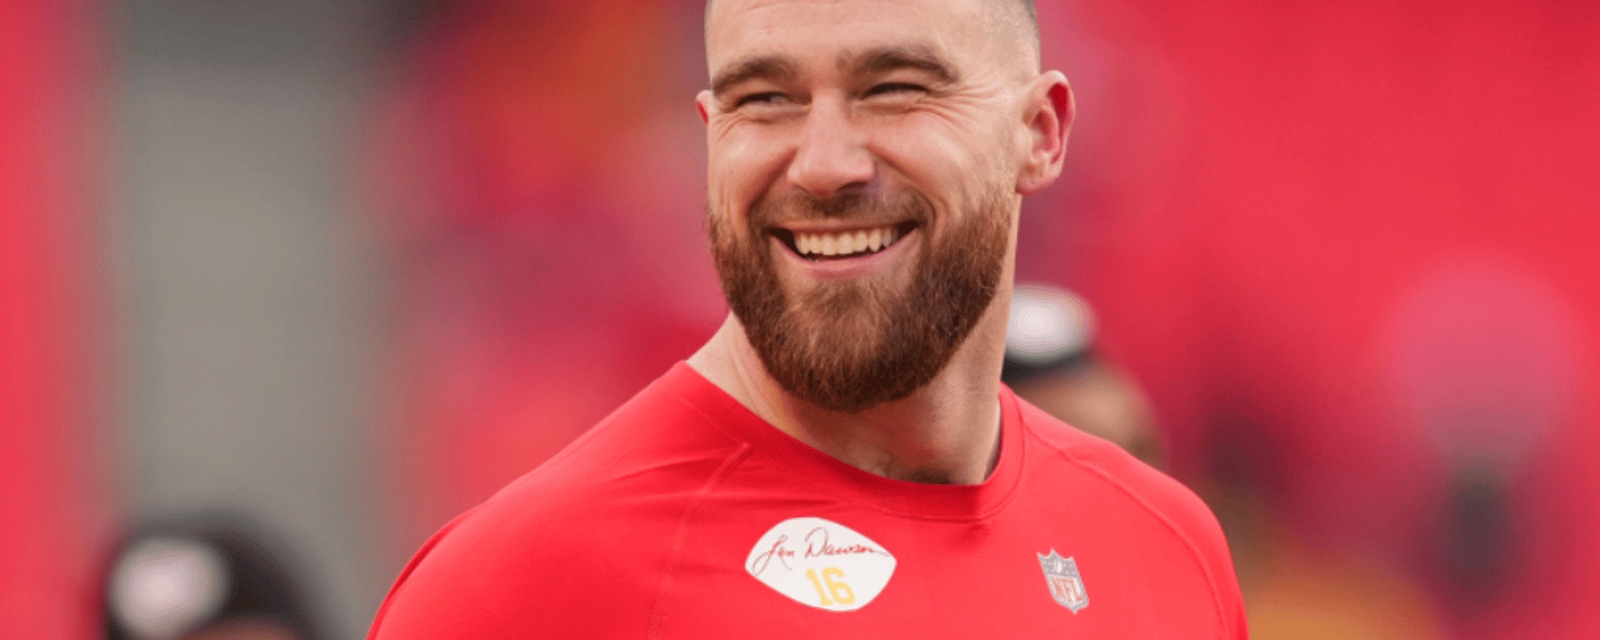 Travis Kelce says Cowboys botched Combine interview with him 